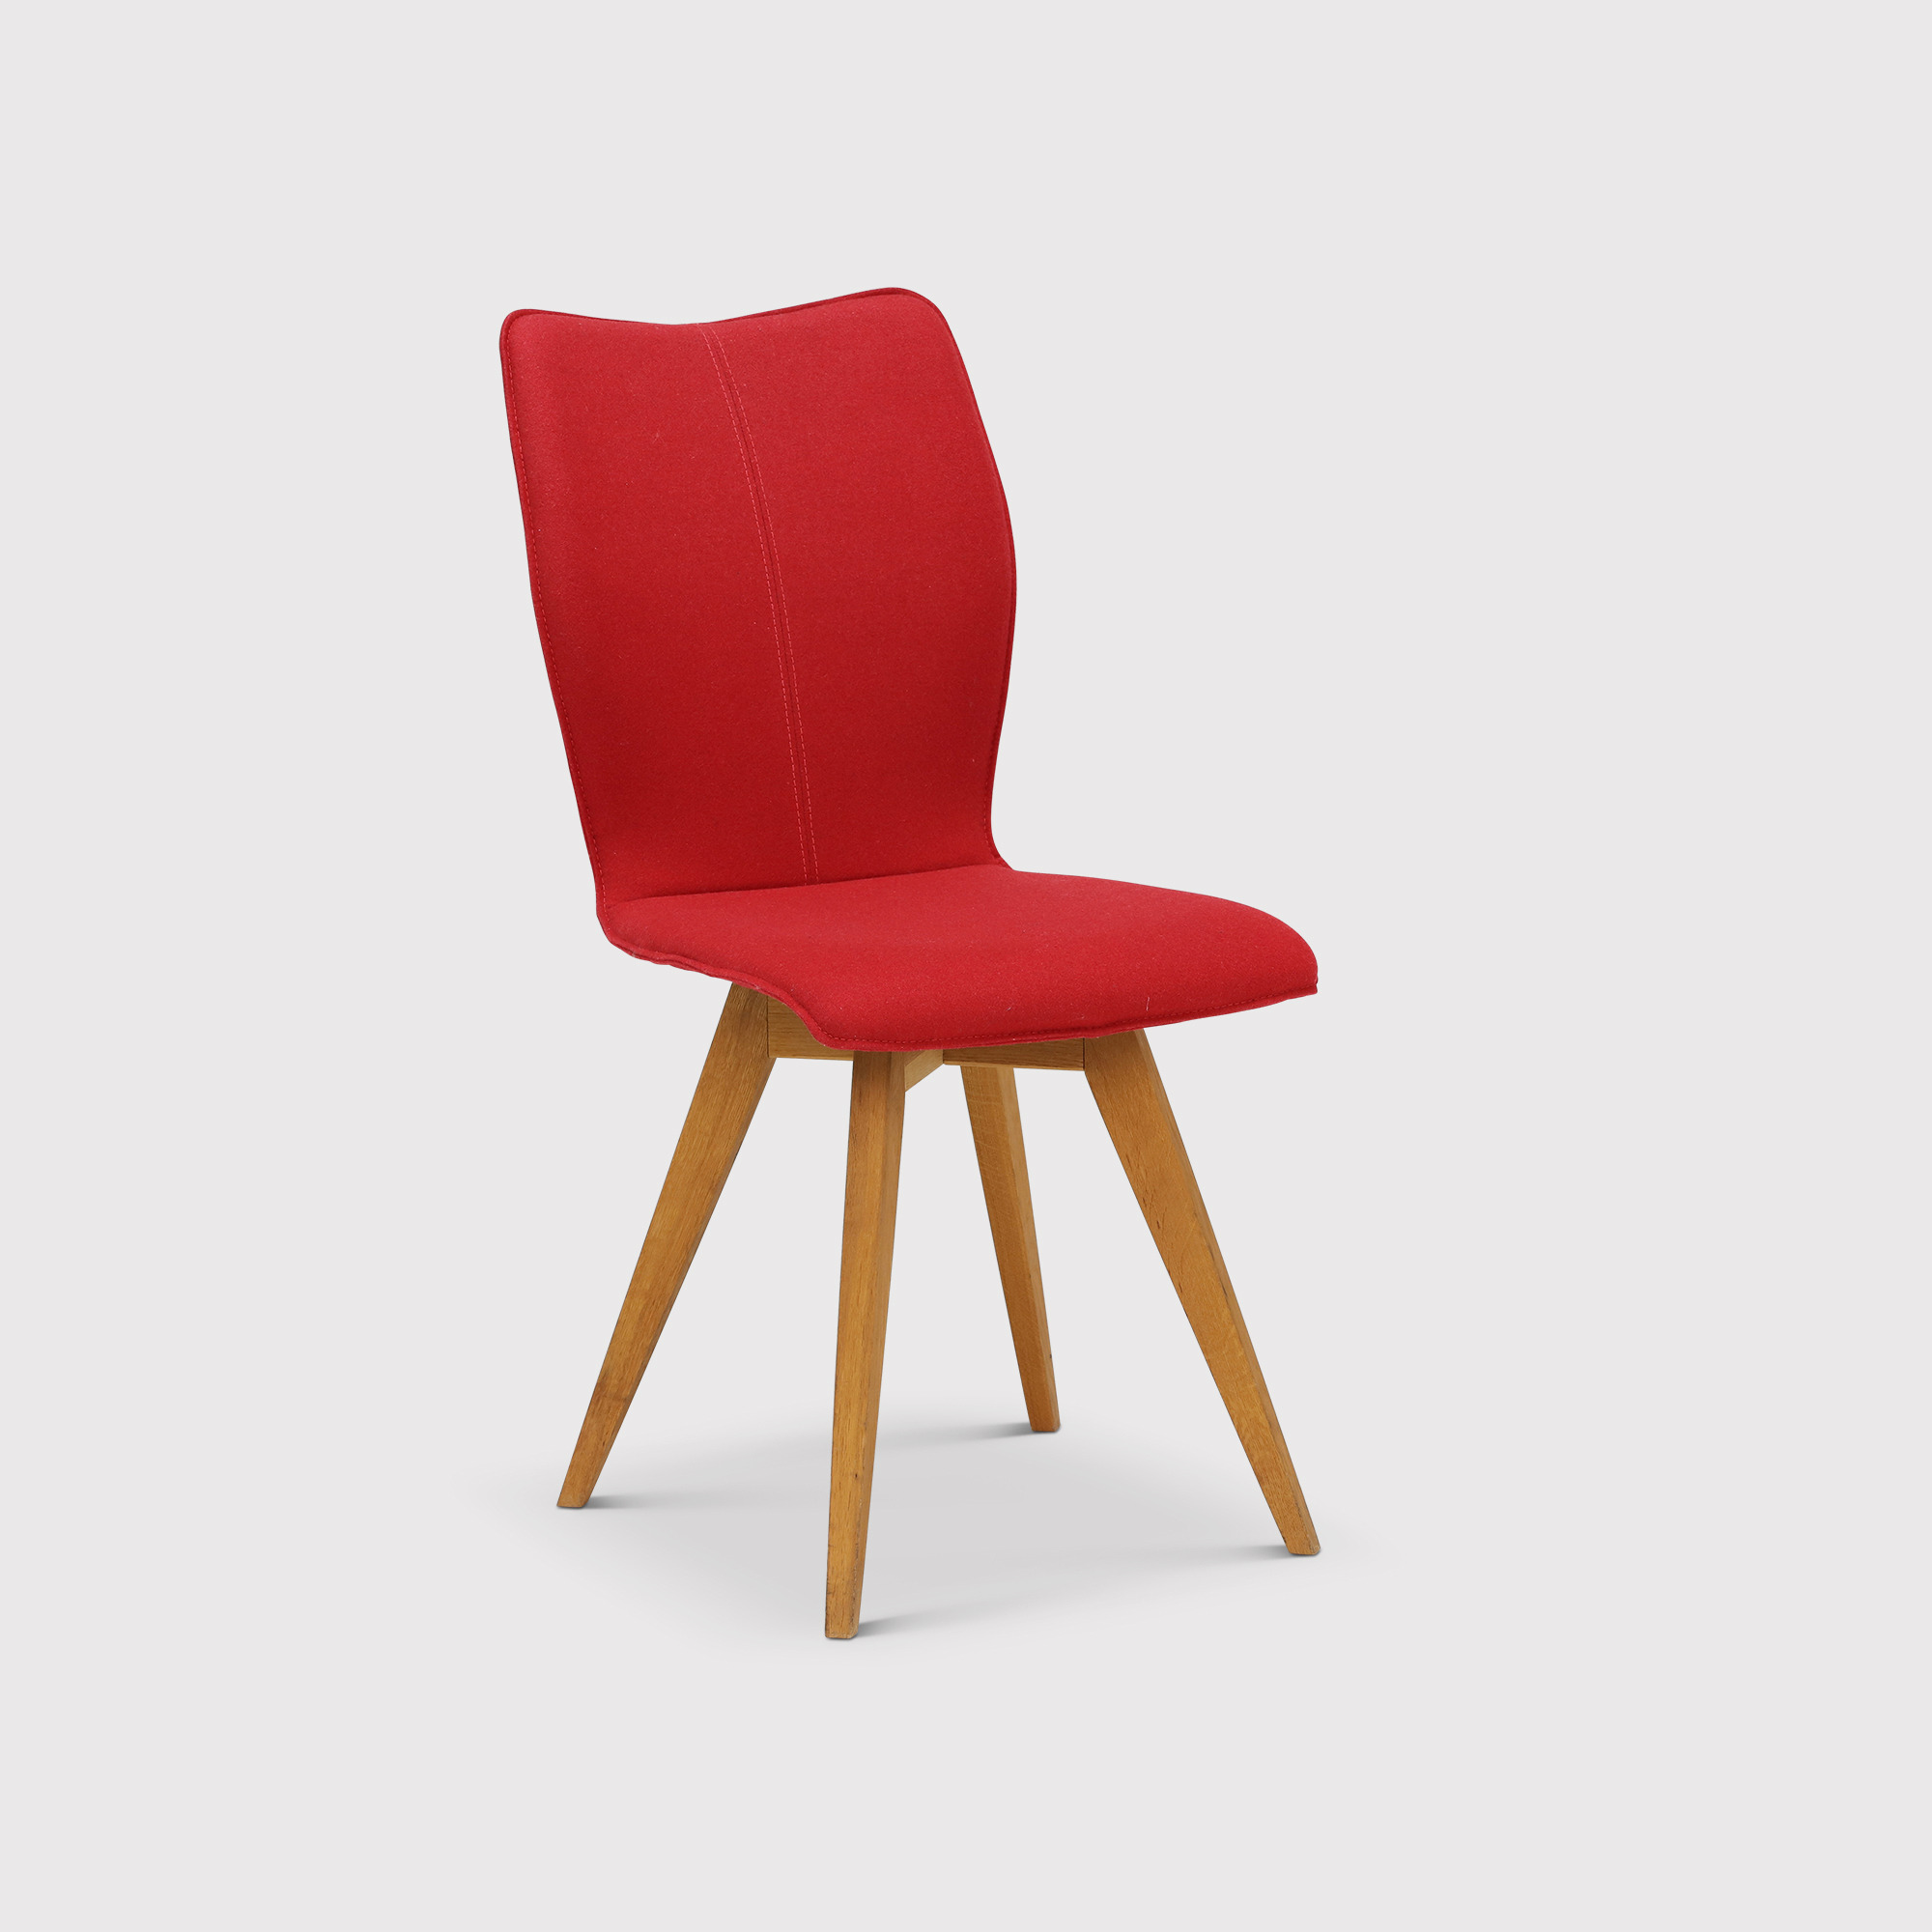 Poppy Dining Chair With Oak Legs, Red Fabric - Barker & Stonehouse - image 1